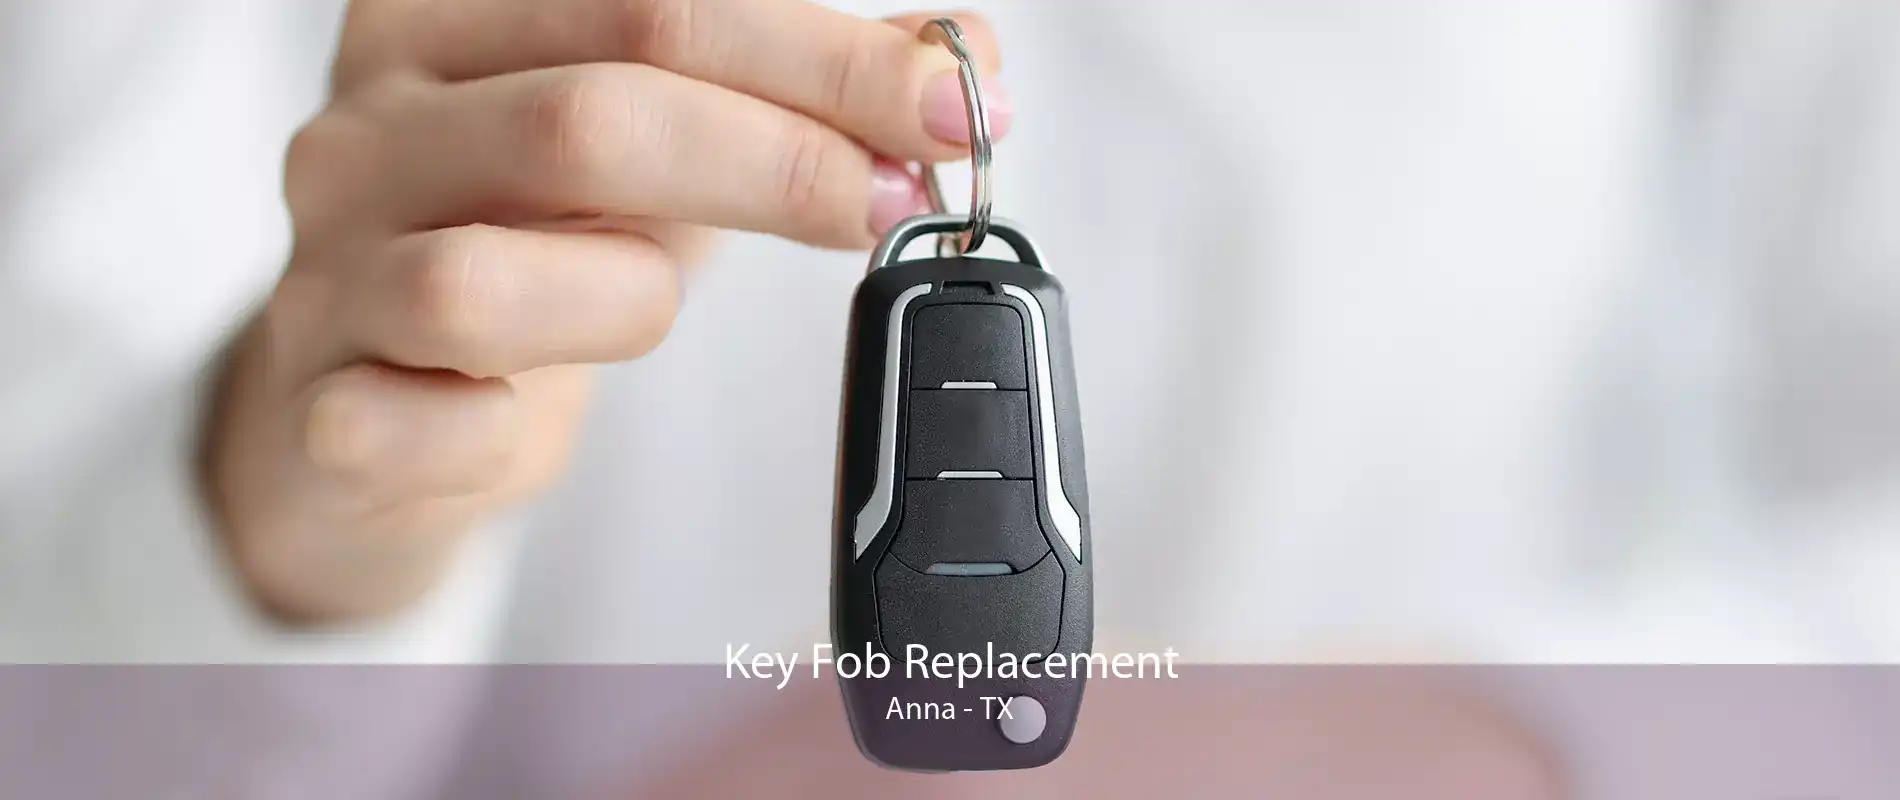 Key Fob Replacement Anna - TX